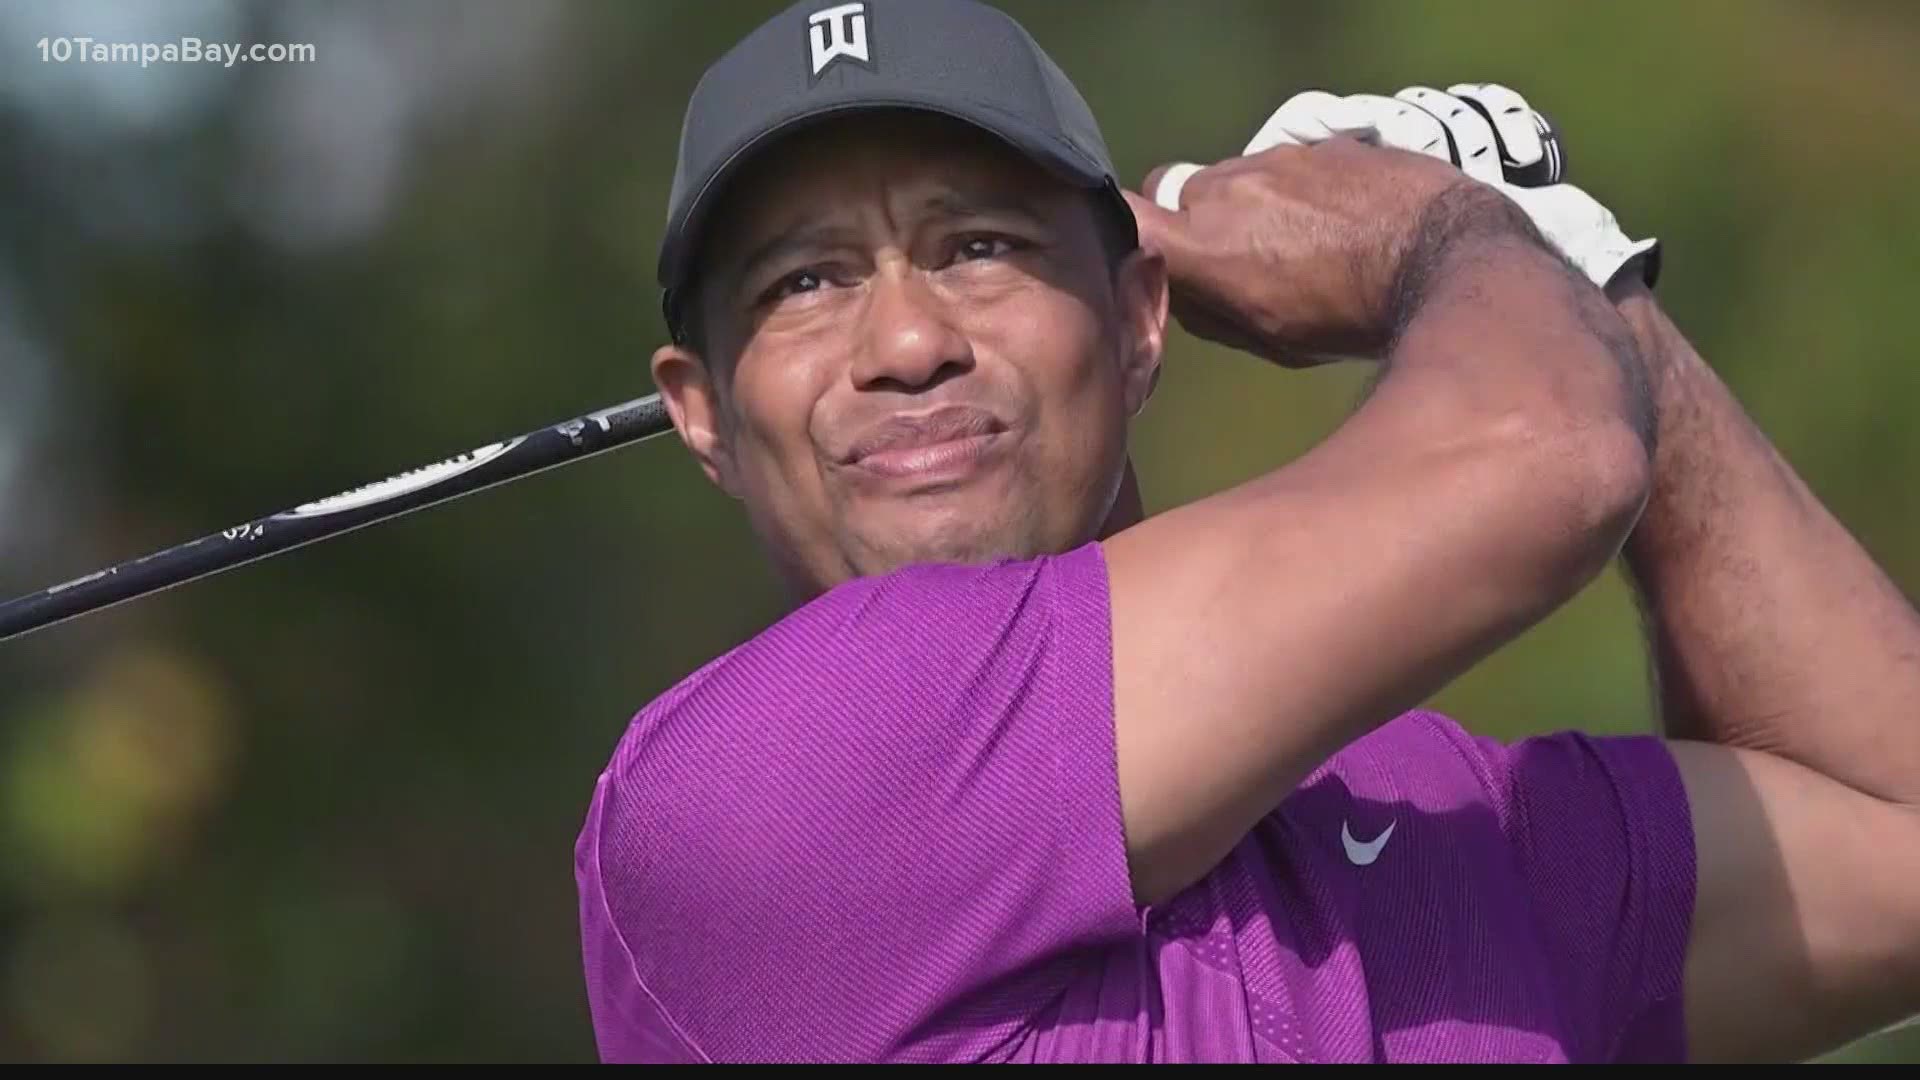 Woods crashed in his SUV in a Los Angeles suburb on Feb. 23, leading to career-threatening injuries to his right leg.